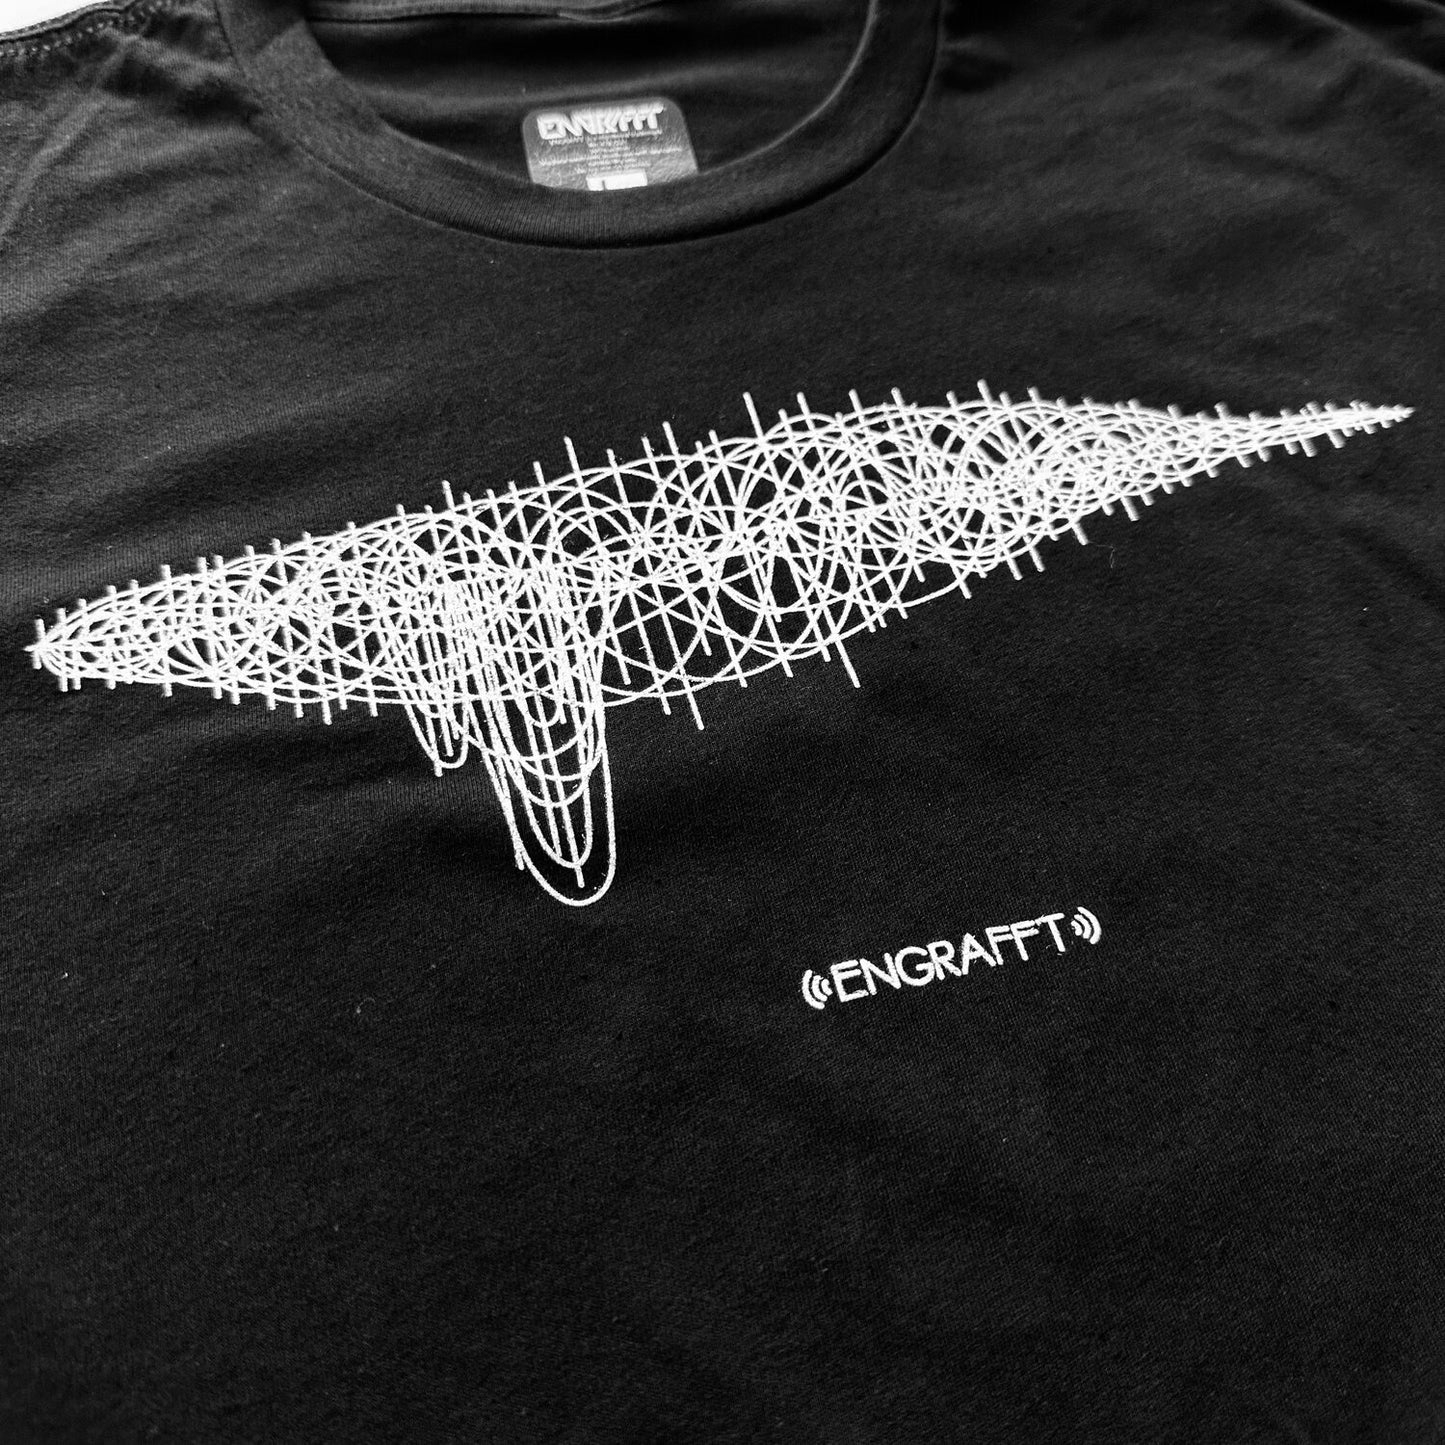 ENGRAFFT - The Whalesong Wavelength Tee